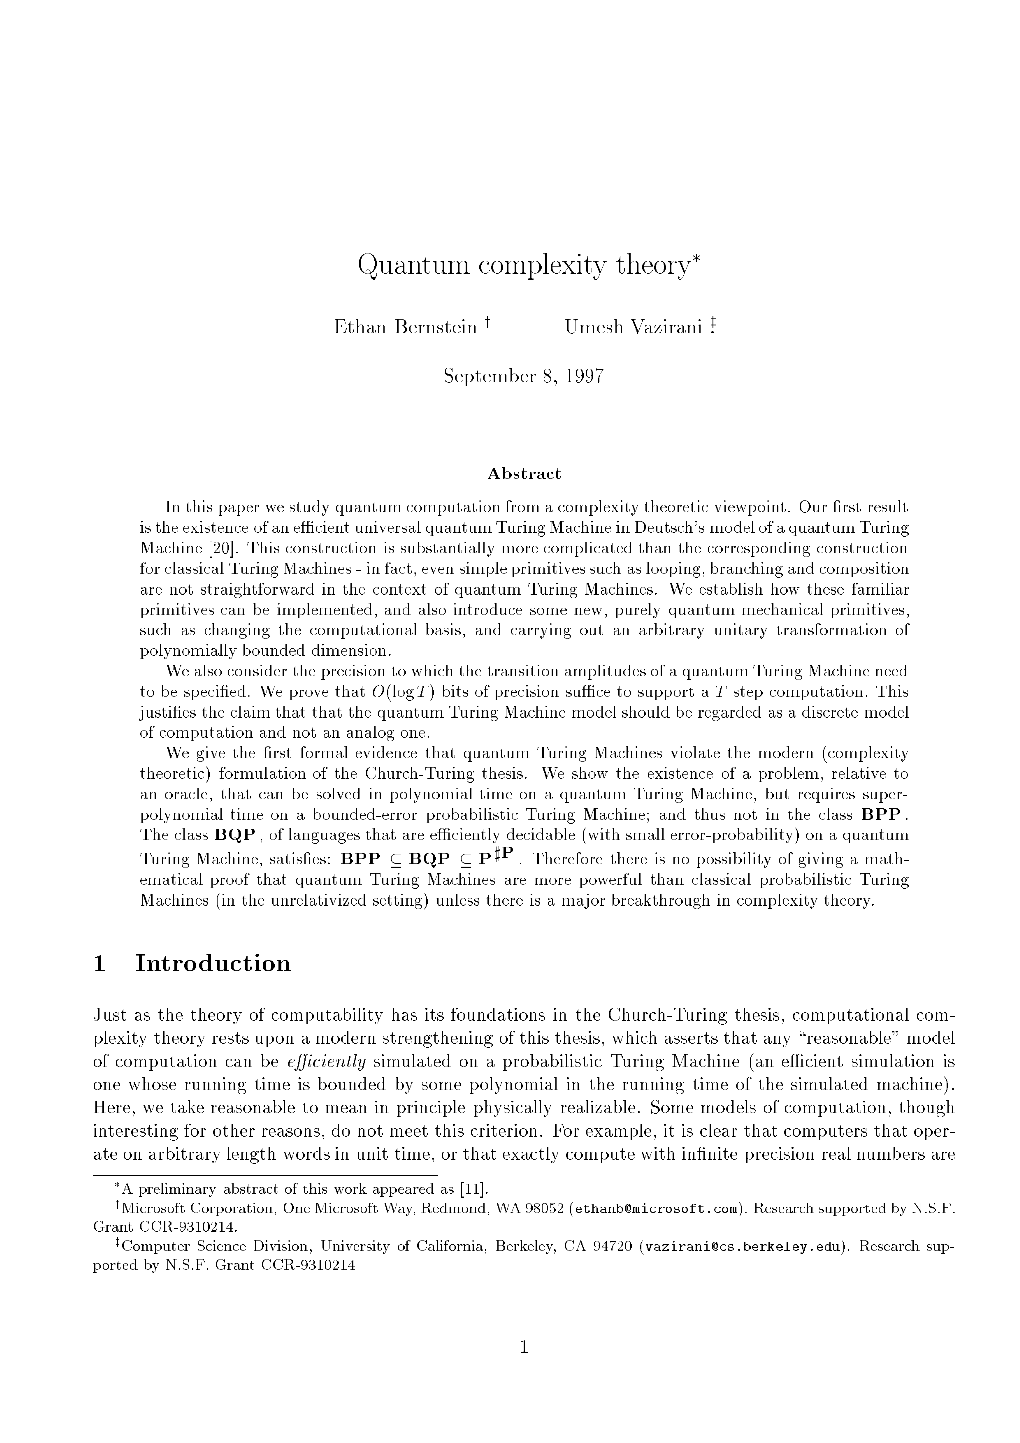 Quantum Complexity Theory 1 Introduction